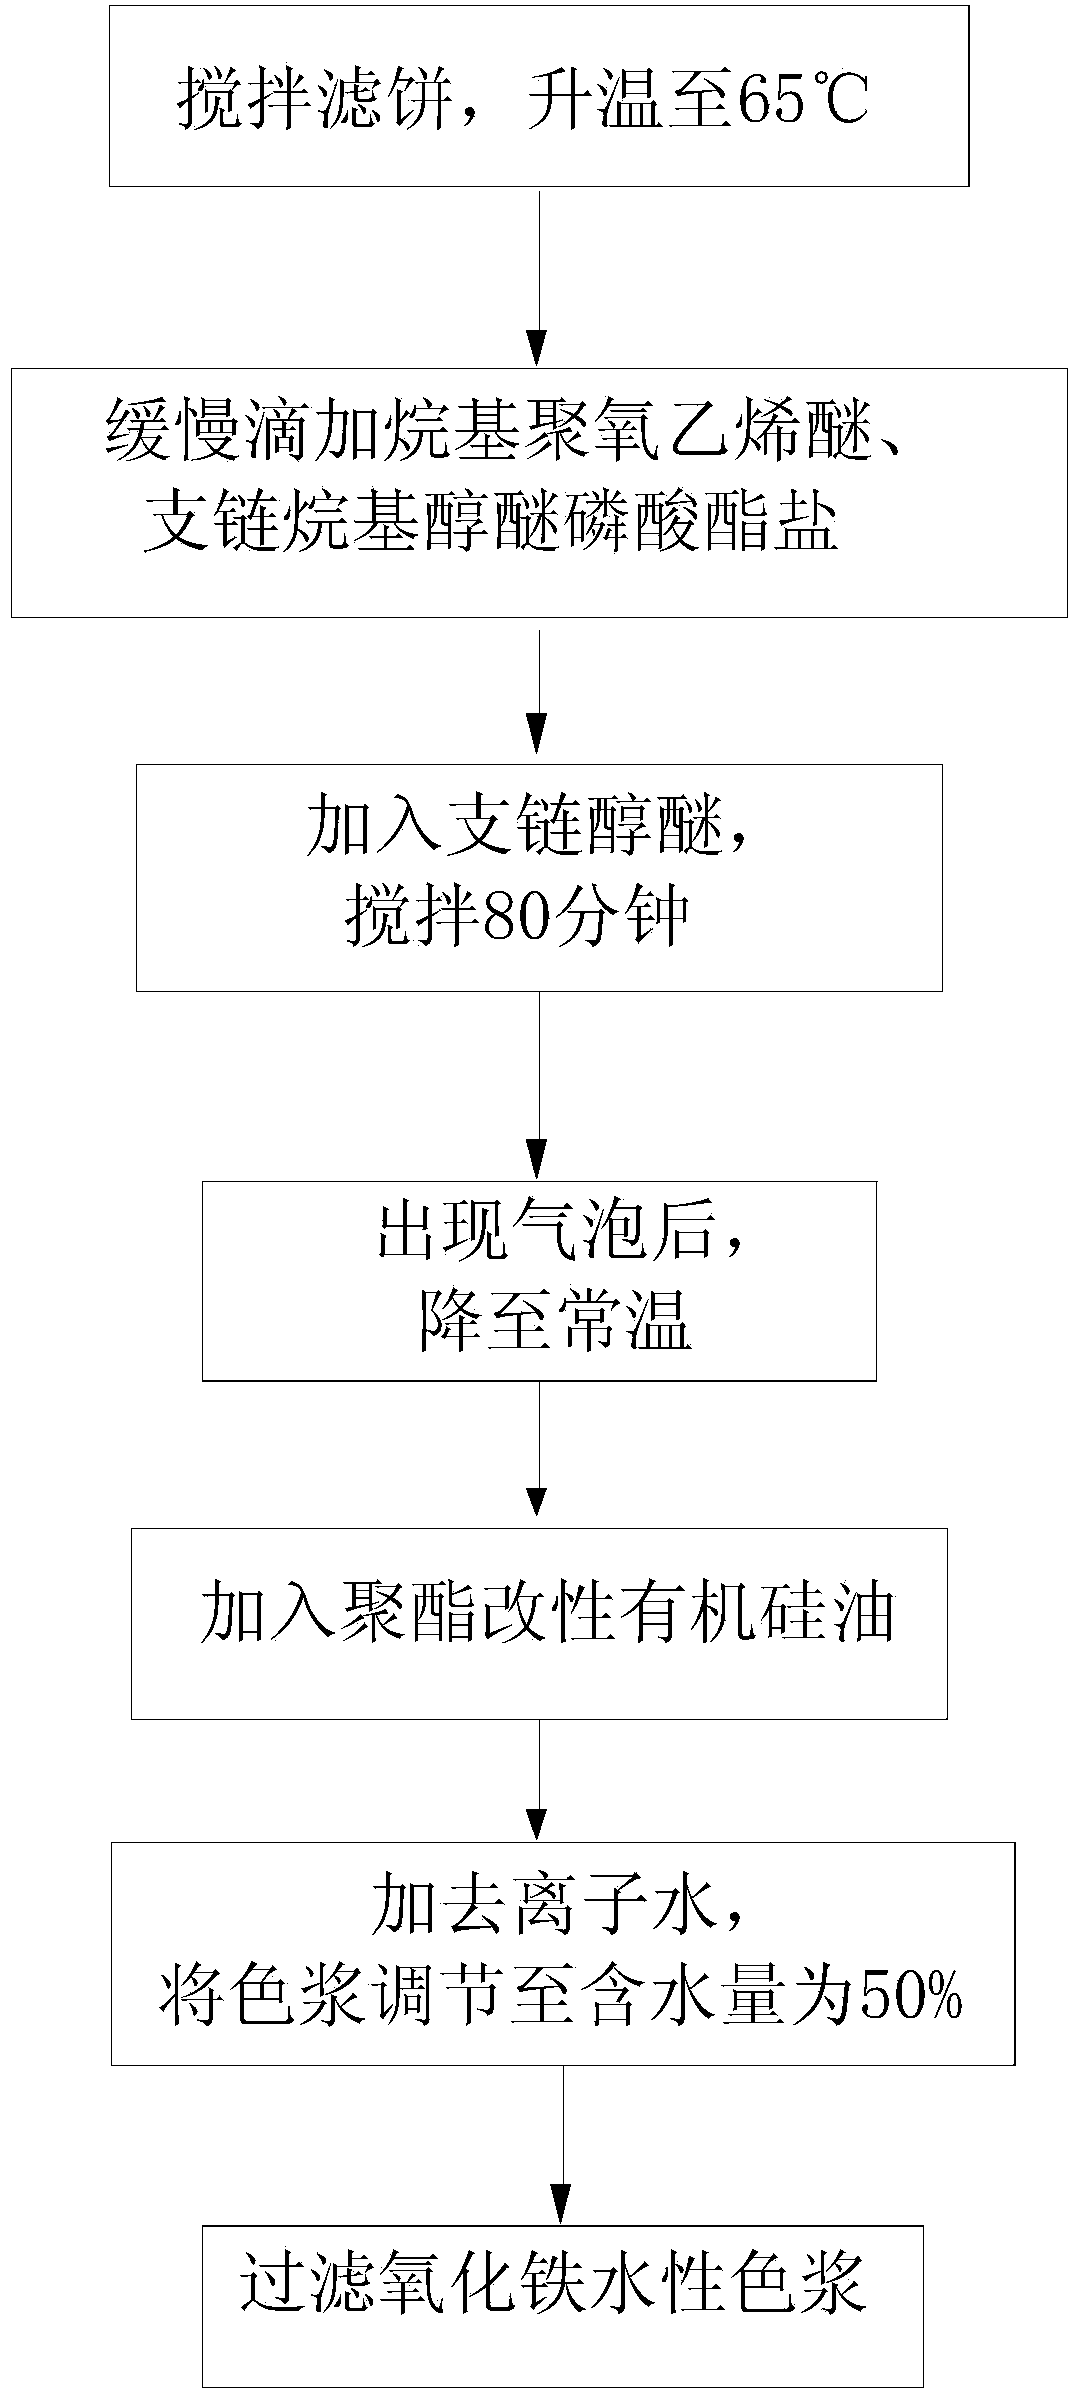 Preparation method of iron oxide water-based color paste